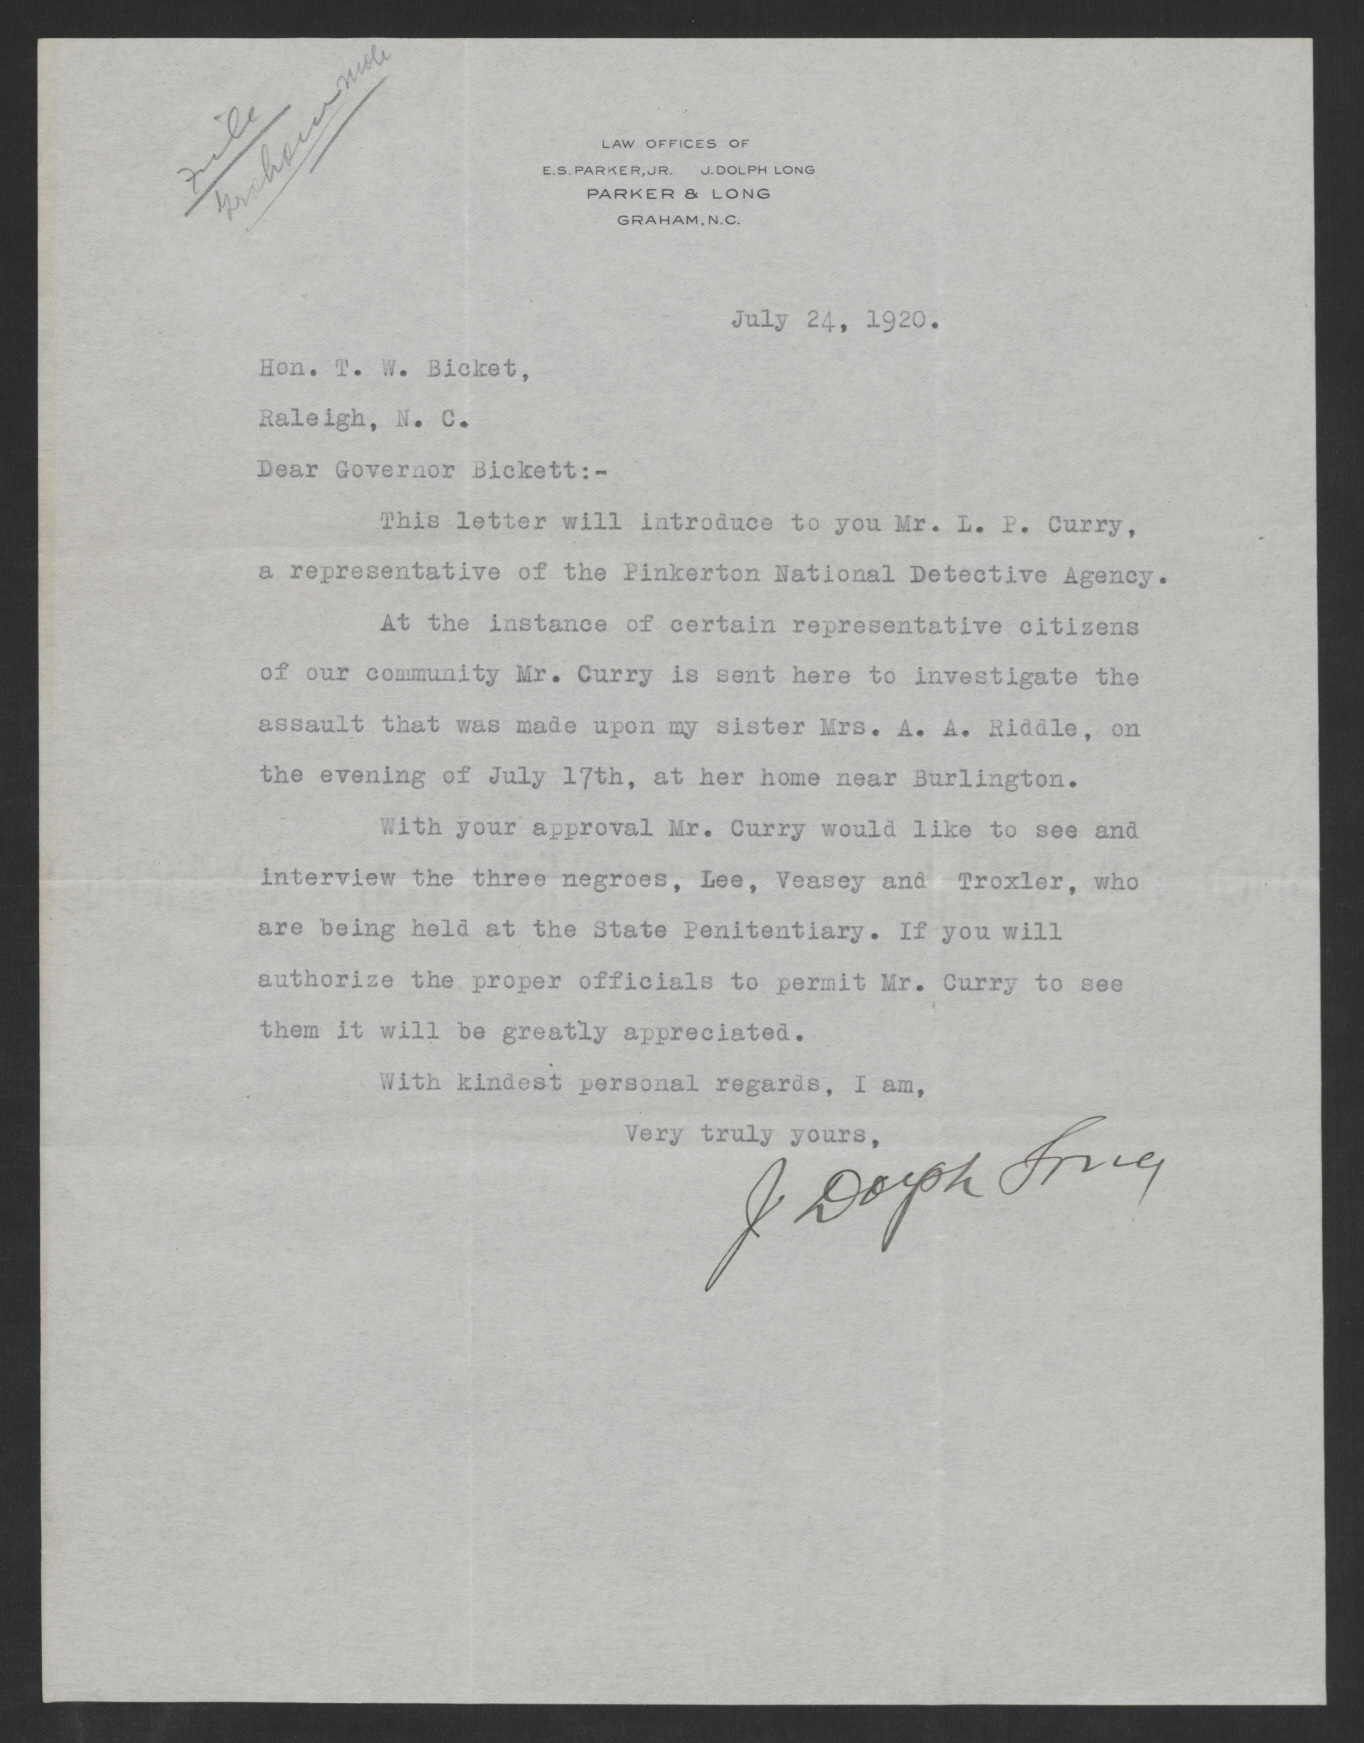 Letter from James A. Long to Thomas W. Bickett, July 24, 1920